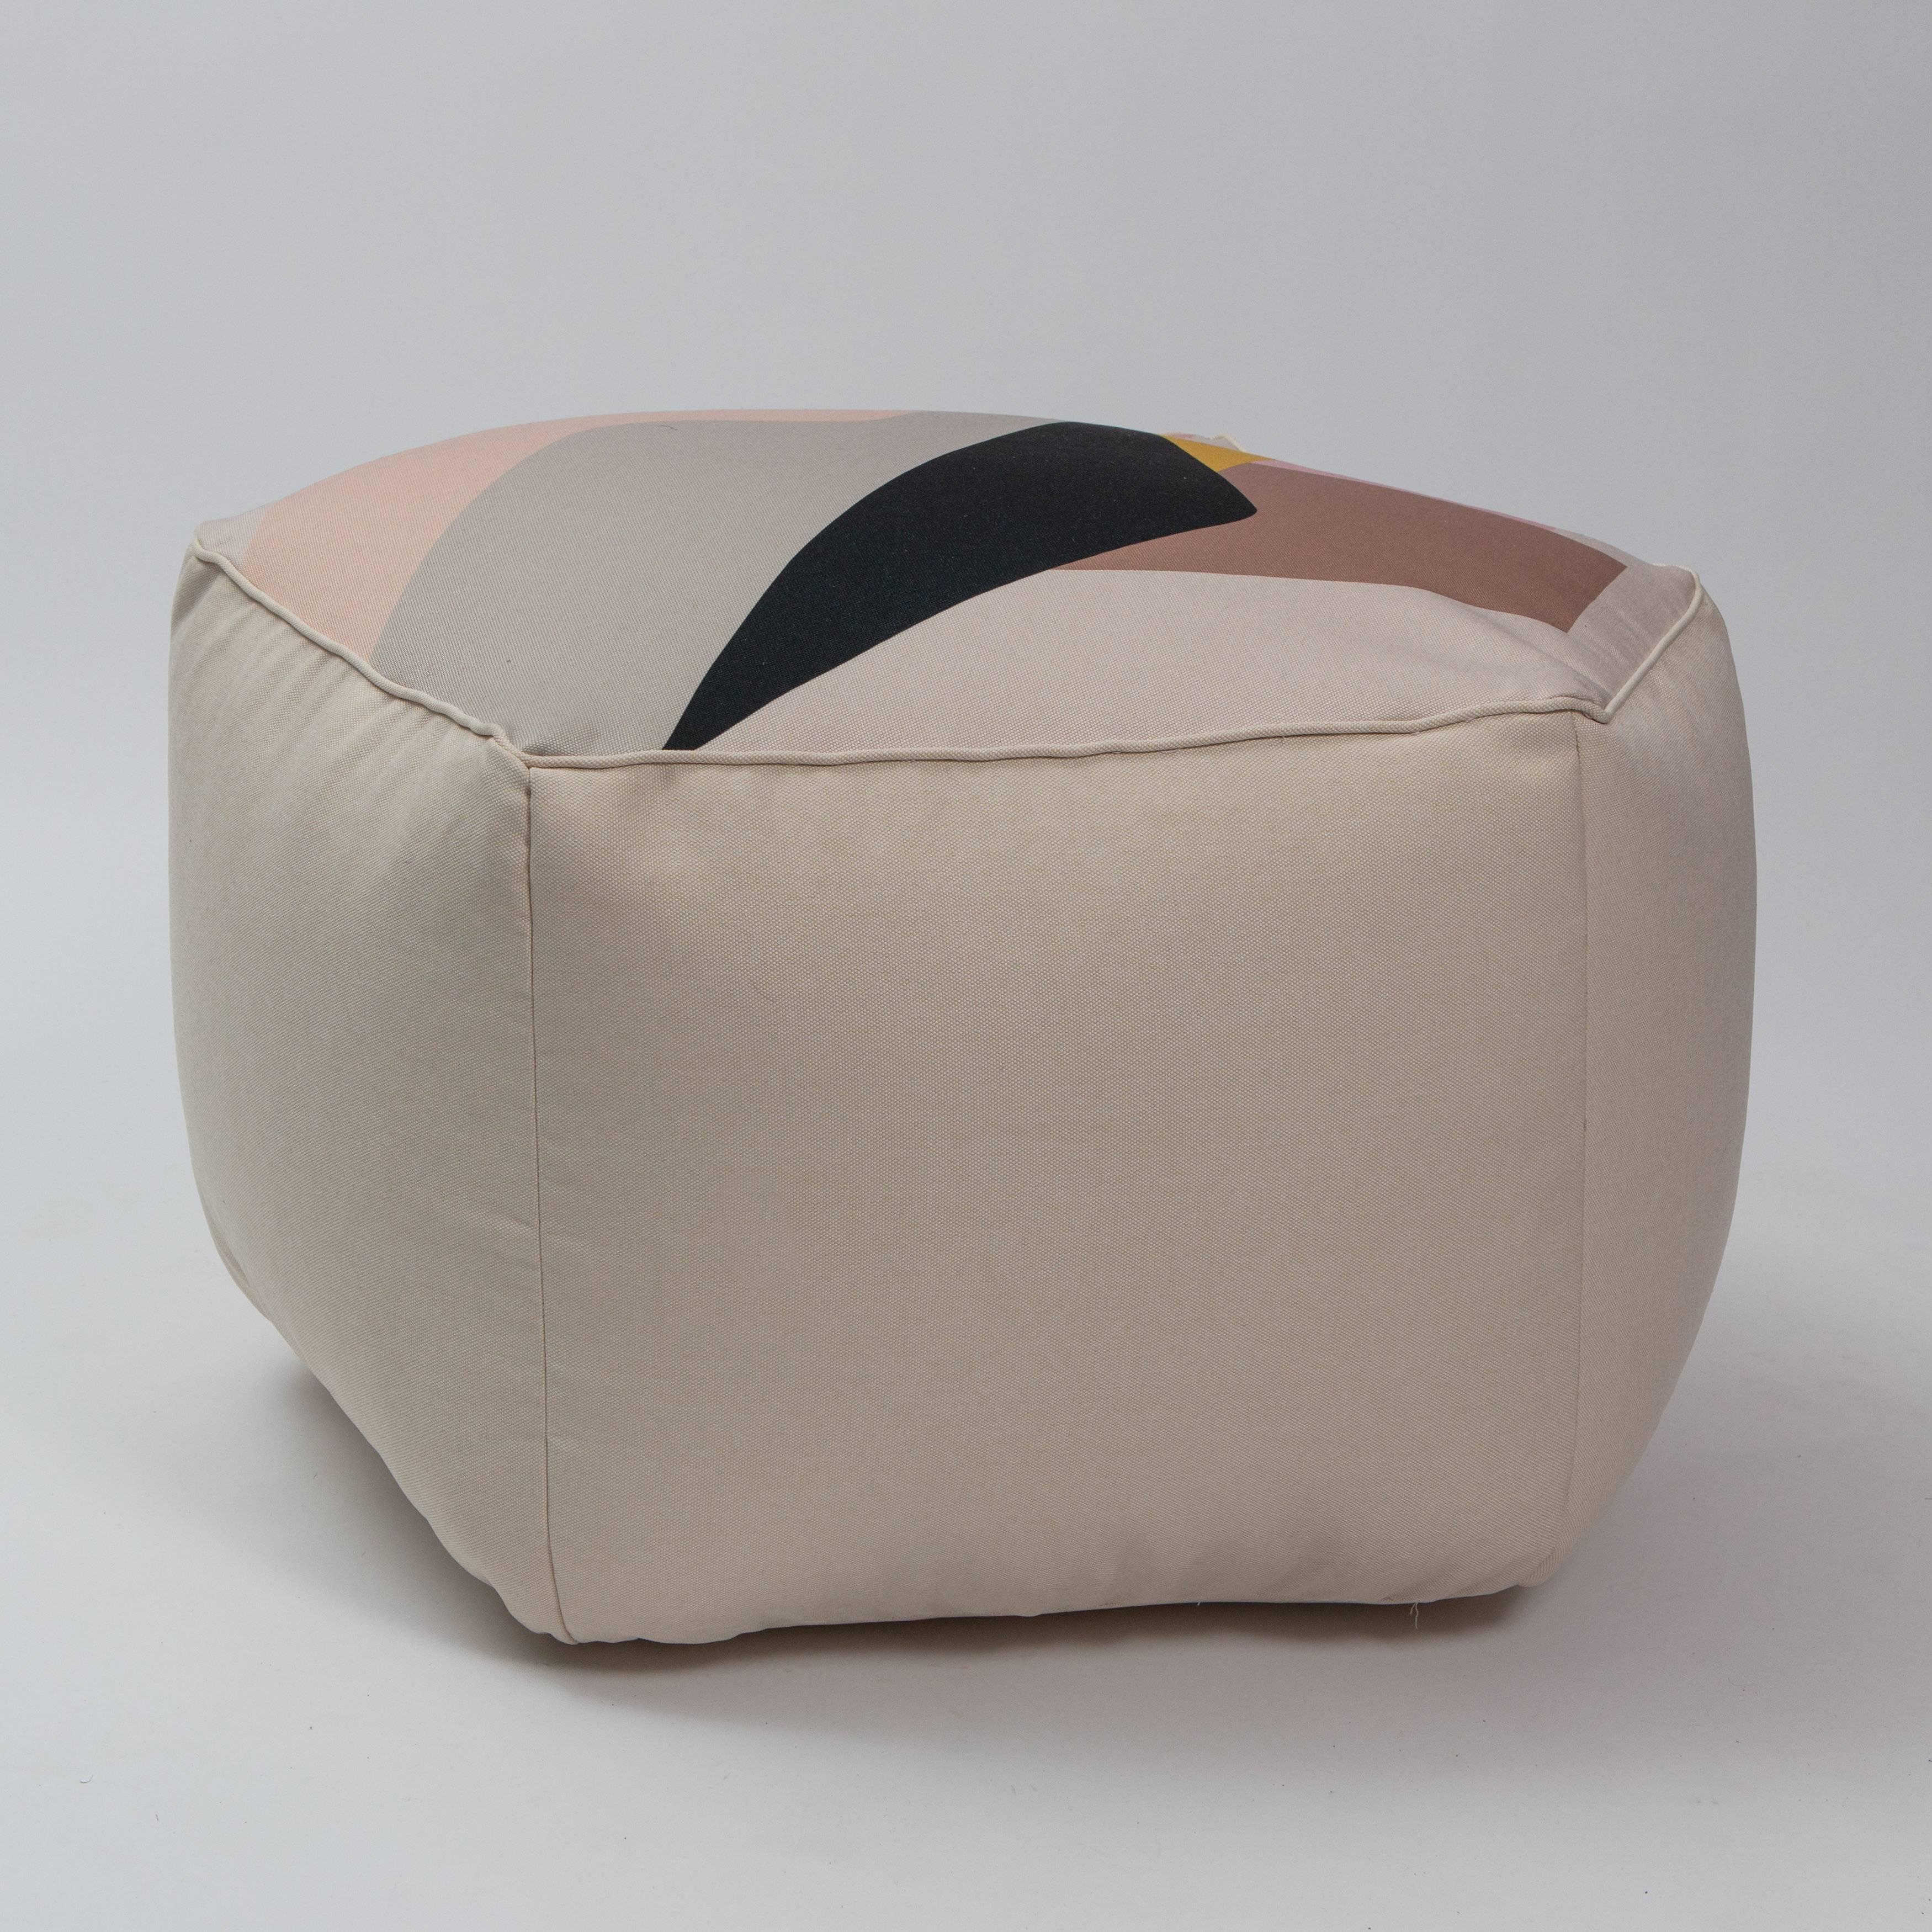 This pouf was designed for a show at reGeneration entitled "Two Mundos." The collection of 70 pieces includes individual work by 9 Costa Rican designers as well as collaborations between the show's curator, Gabriela Valenzuela-Hirsch and